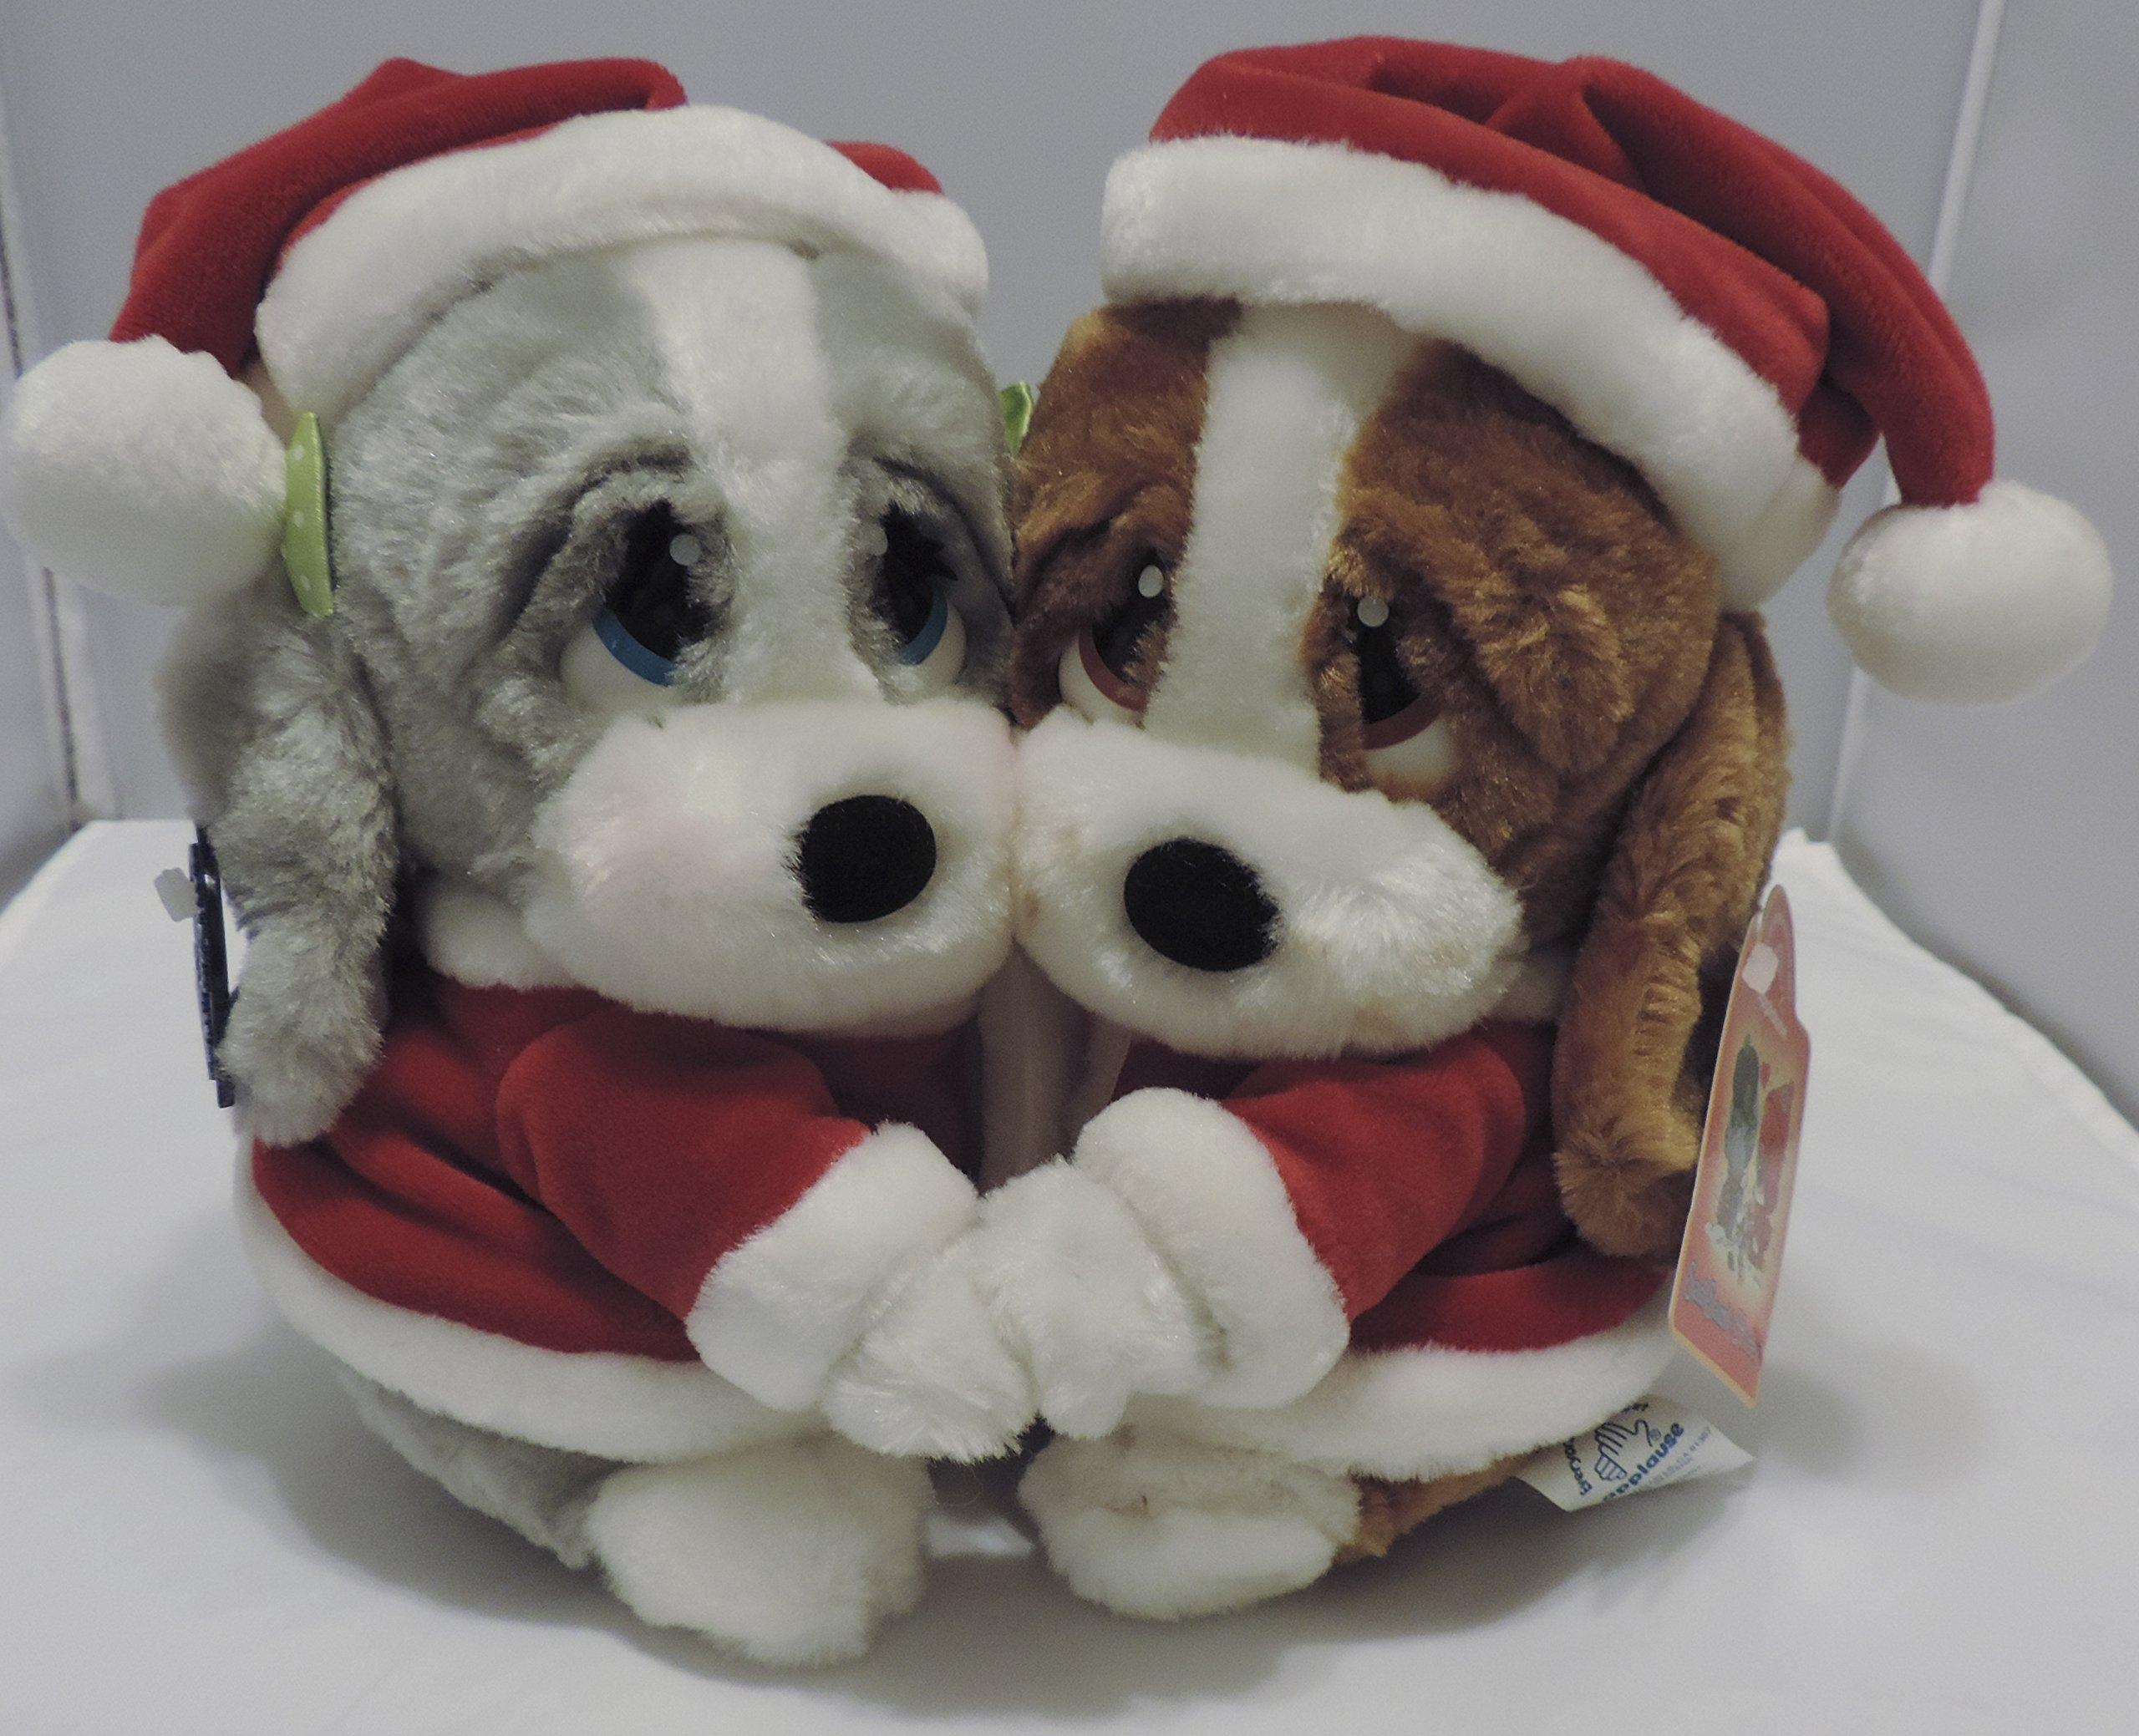 Christmas Plush Sad Sam and Honey Basset Hounds come dressed in their holiday best f as Santa, elves and many adorable Christmas Characters.